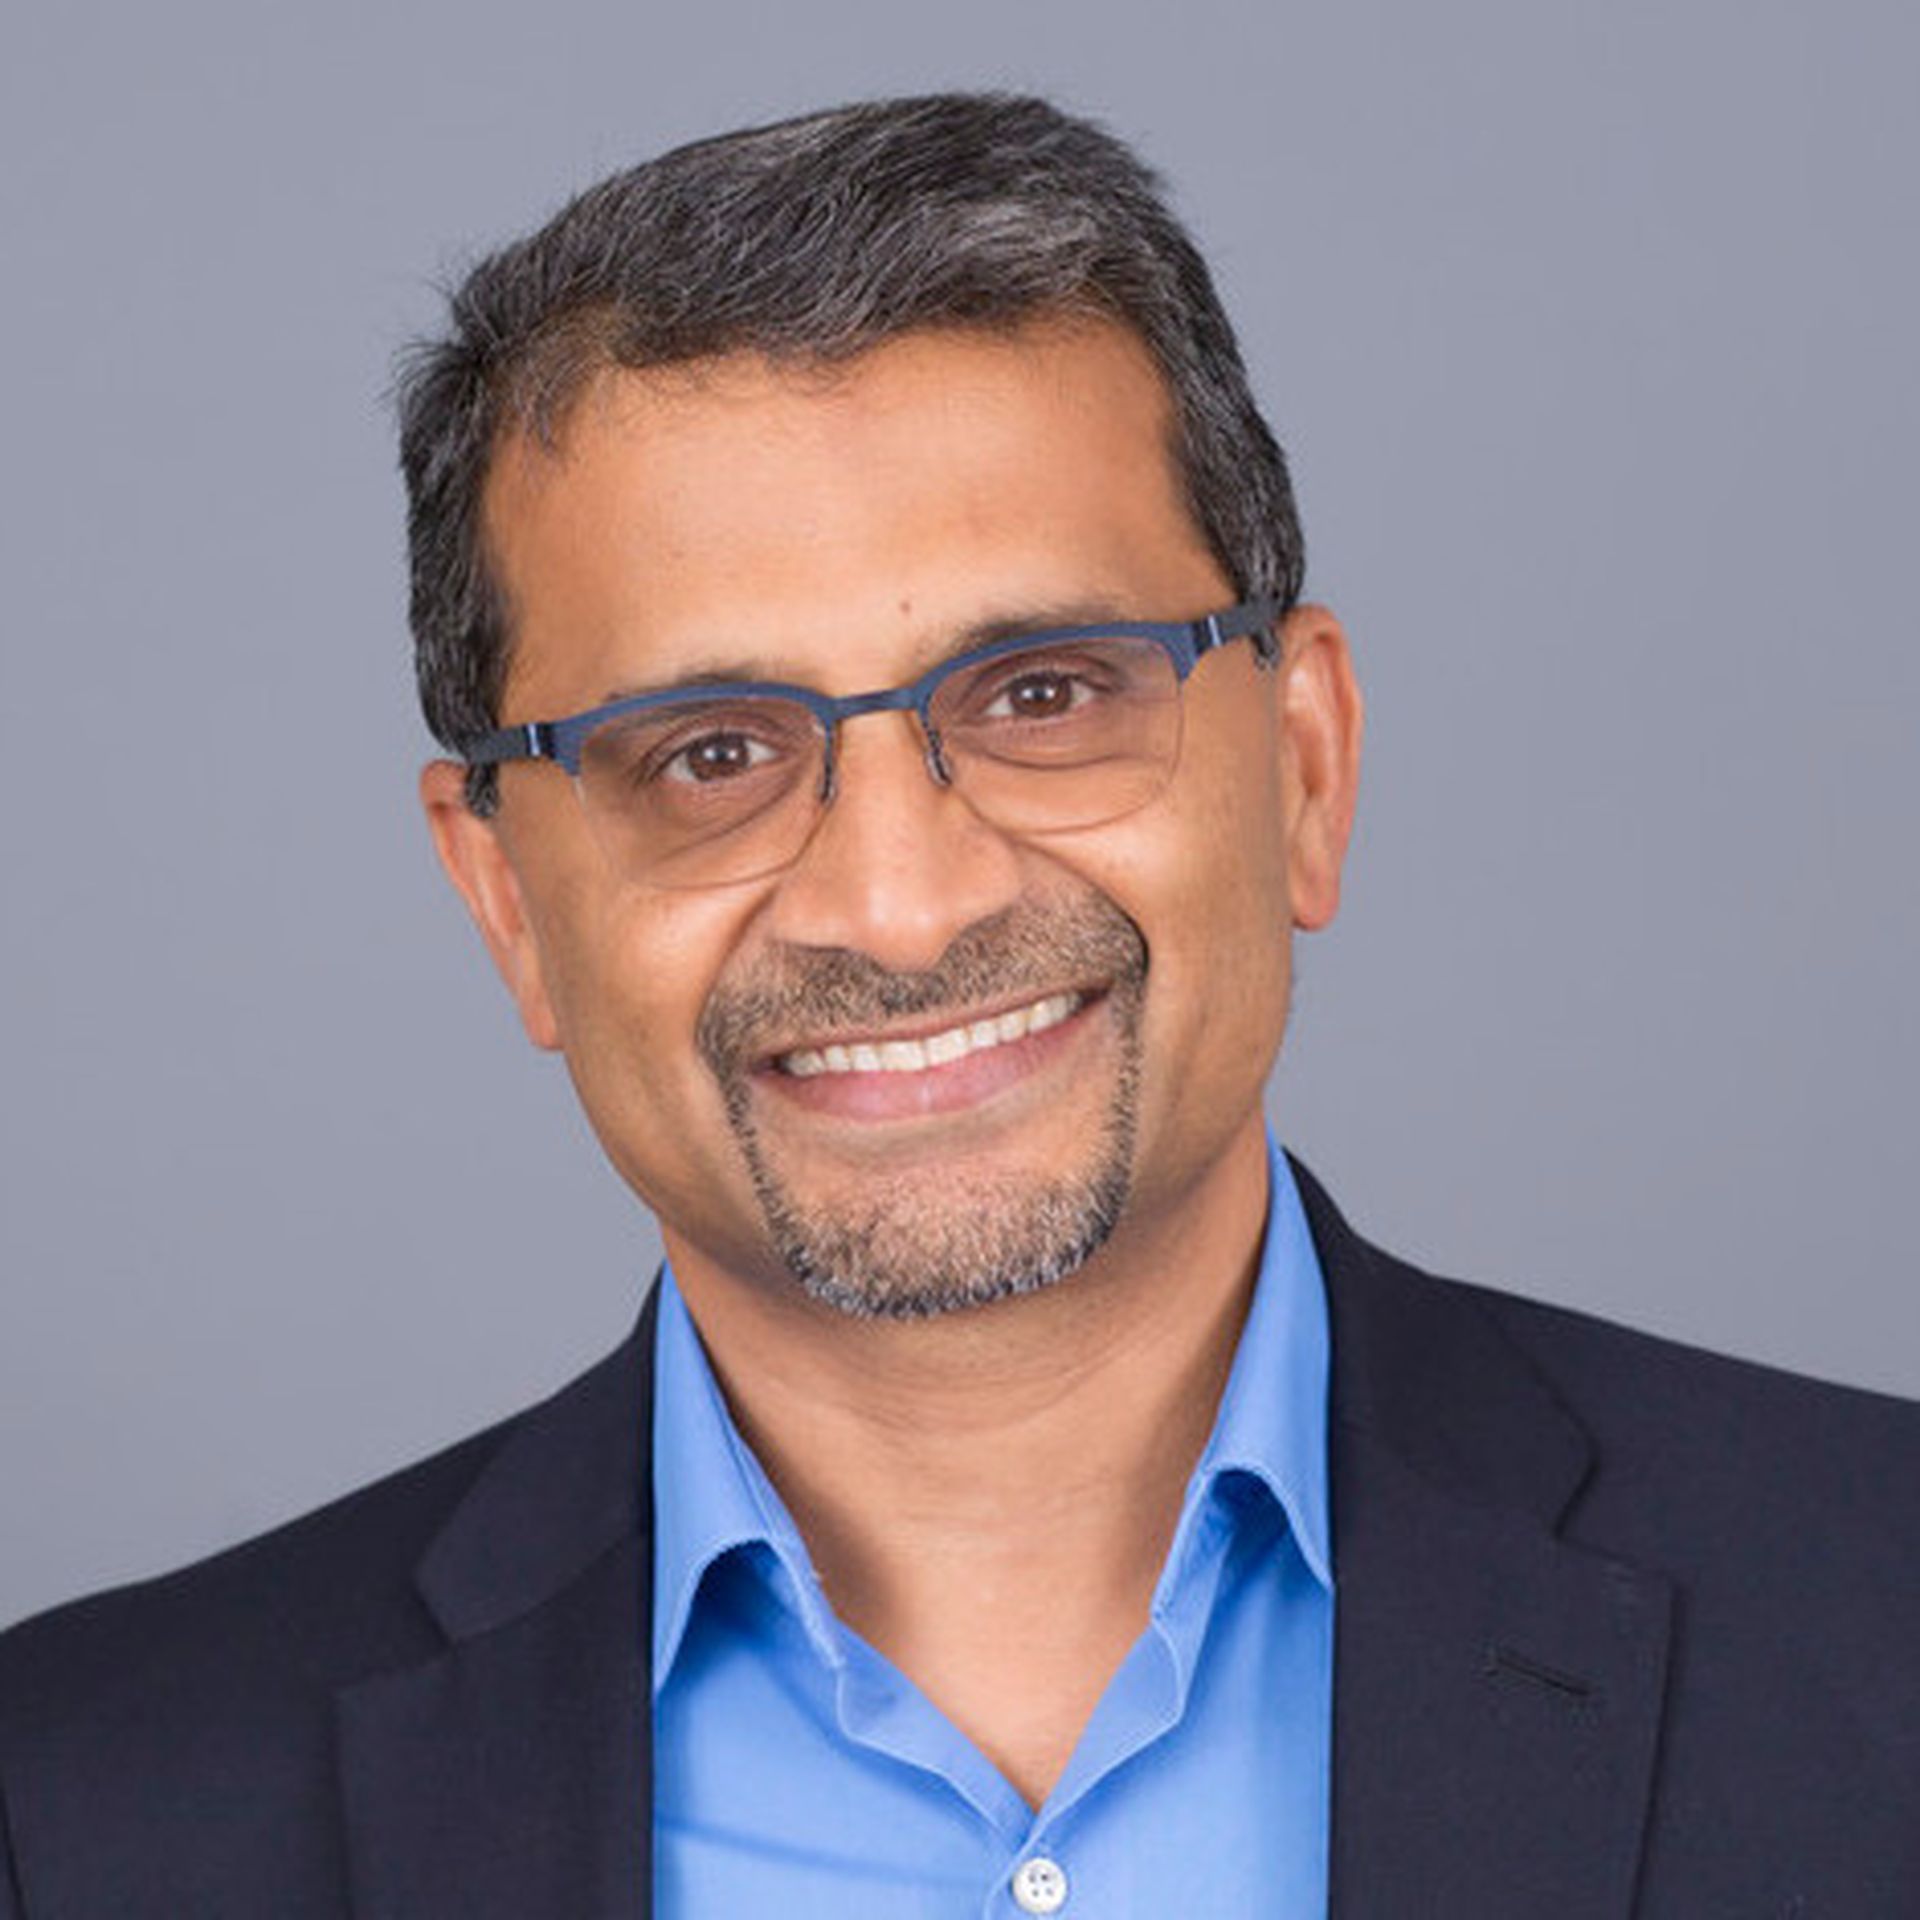 LinkedIn: Radhesh Menon, chief product officer, Datto